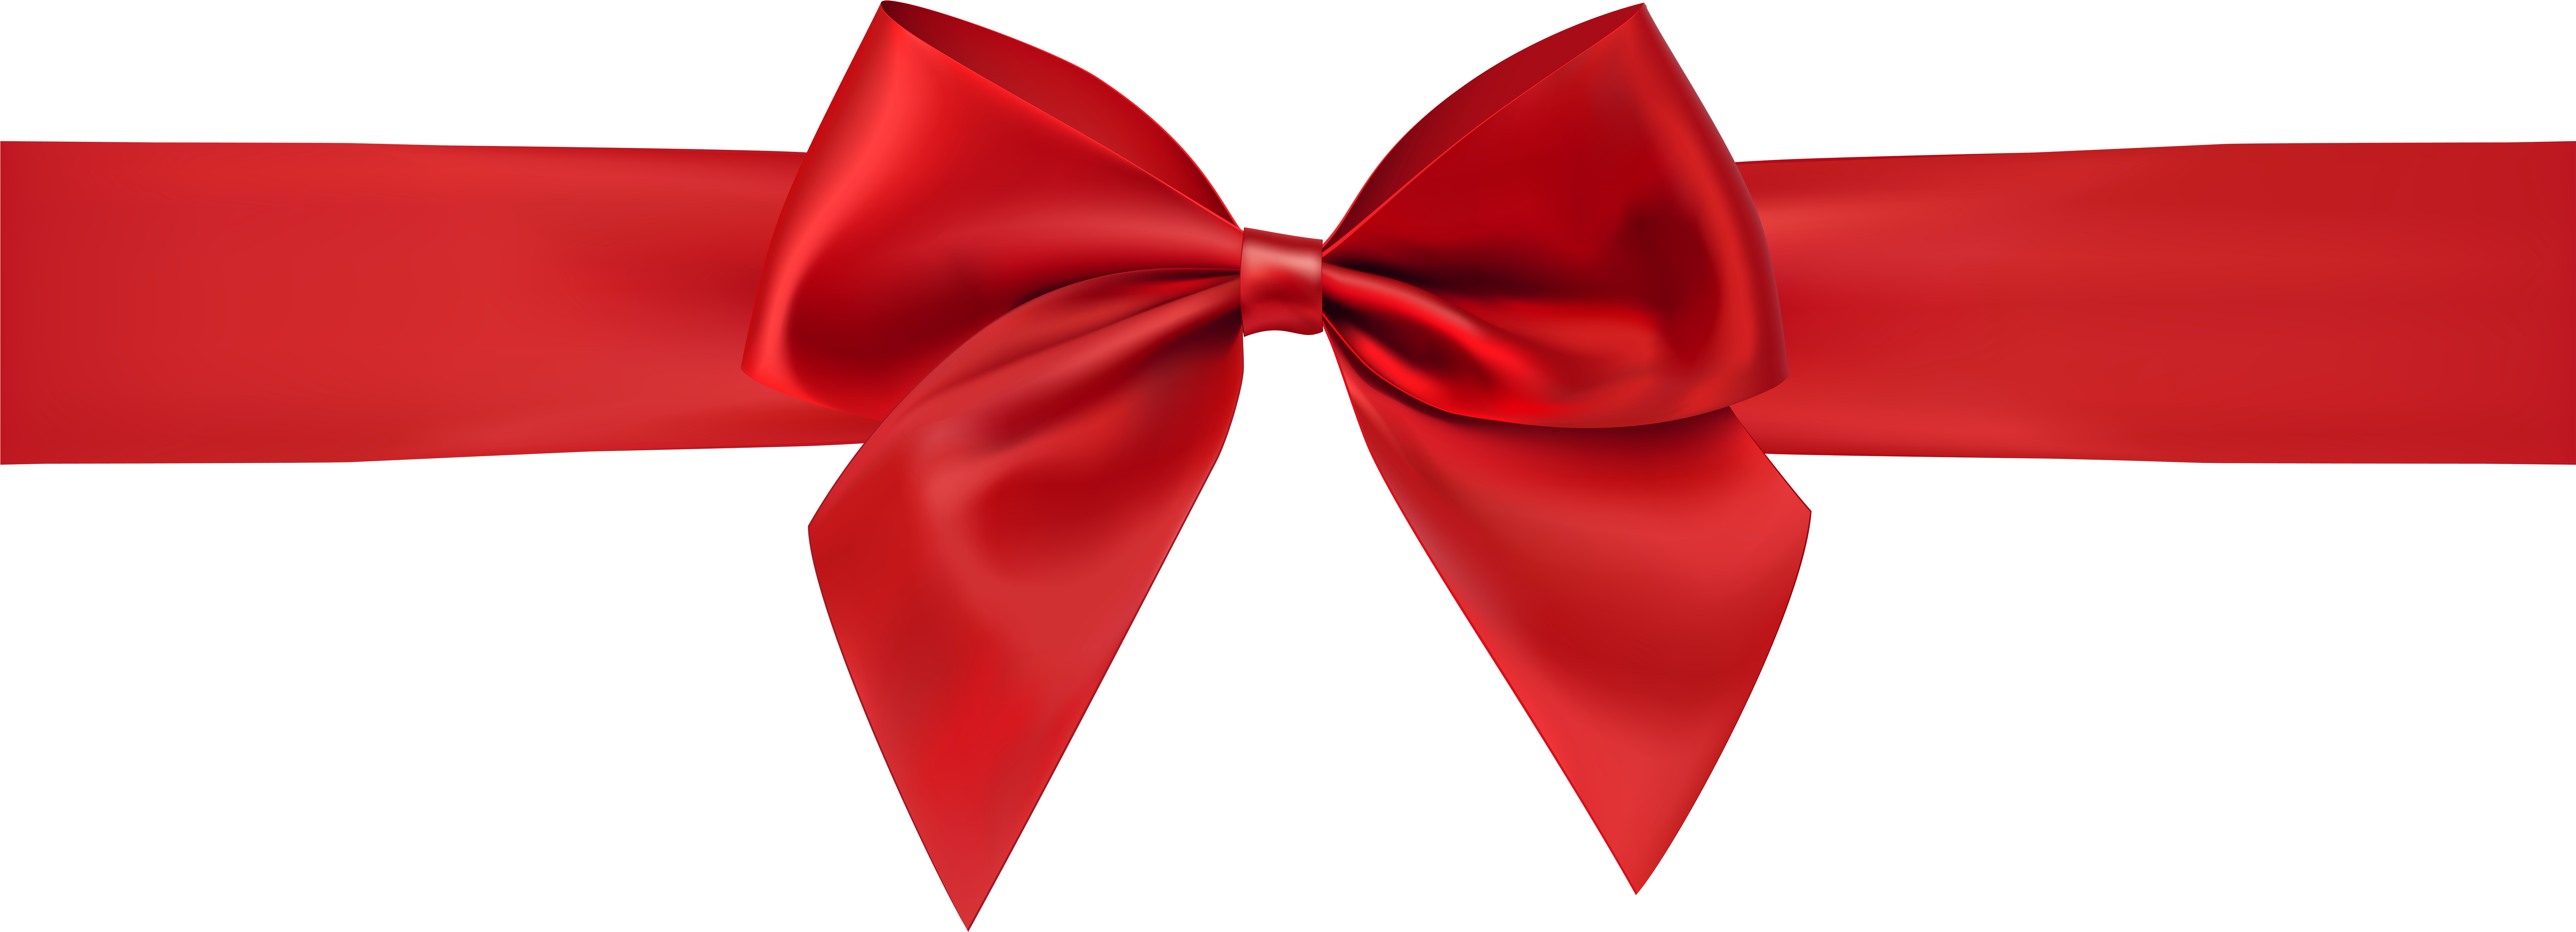 Red Silk Ribbon PNG Transparent Images Free Download